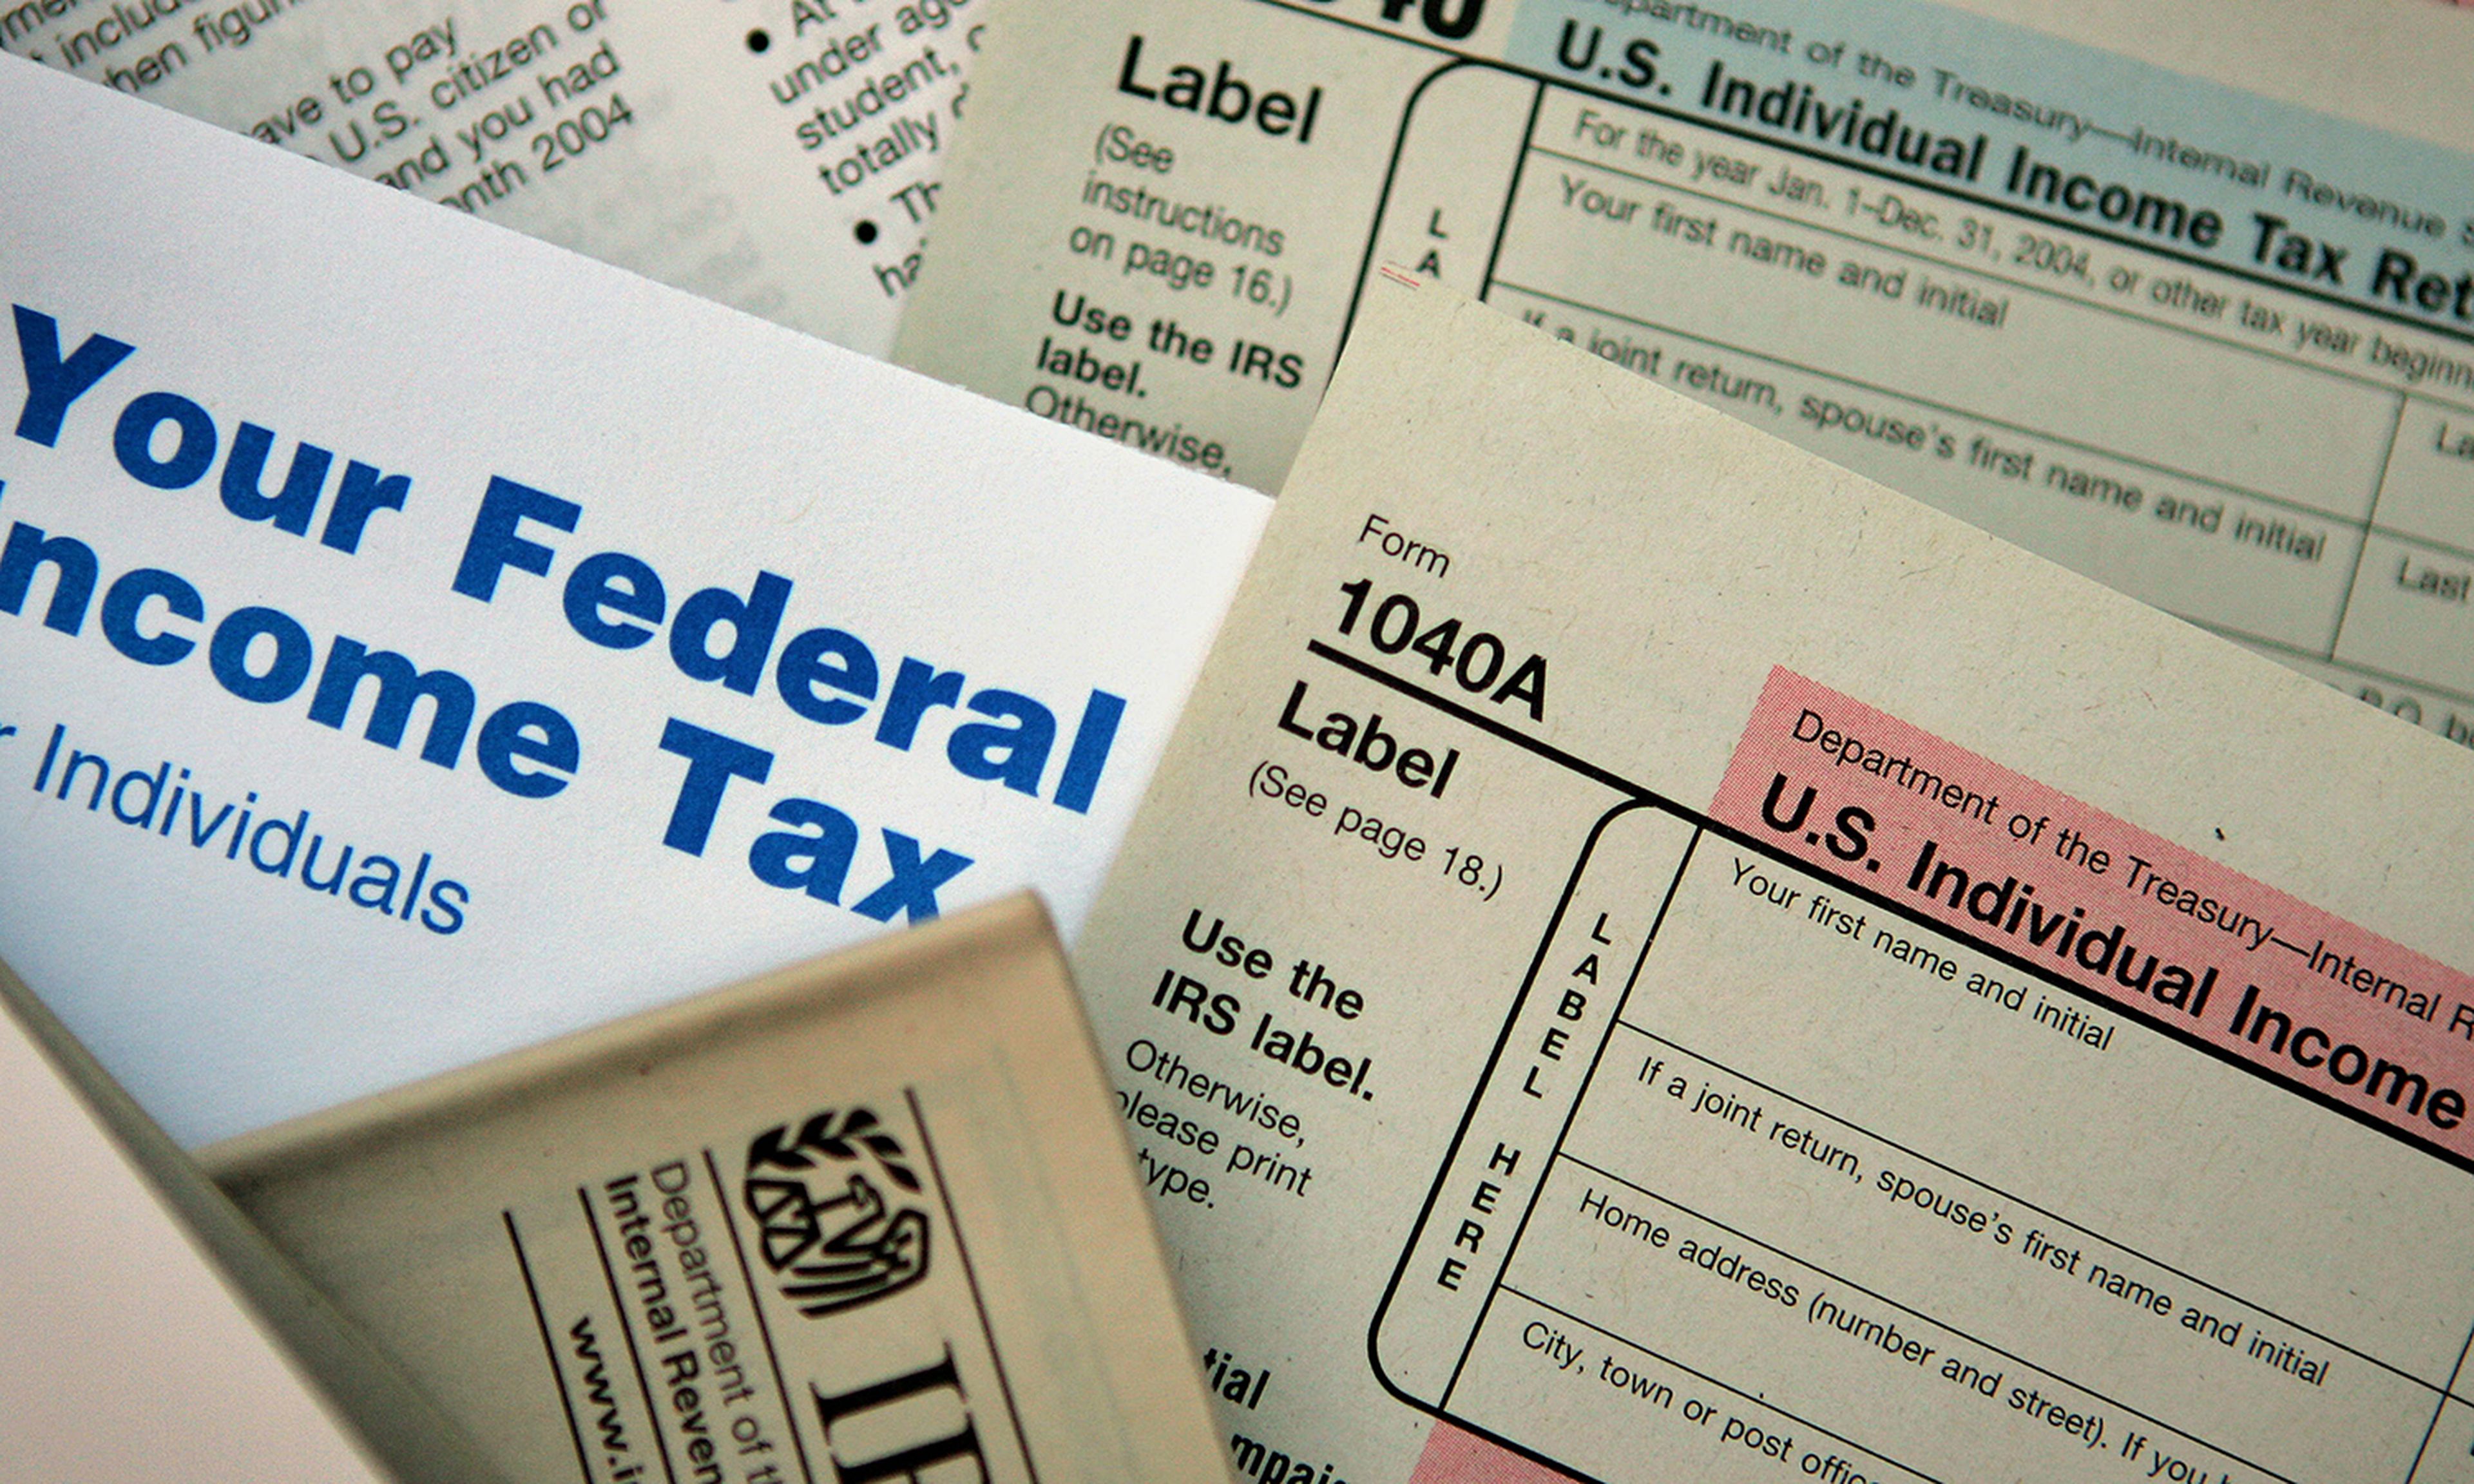 Federal tax forms are distributed at the offices of the Internal Revenue Service on Nov. 1, 2005, in Chicago. (Photo Scott Olson/Getty Images)